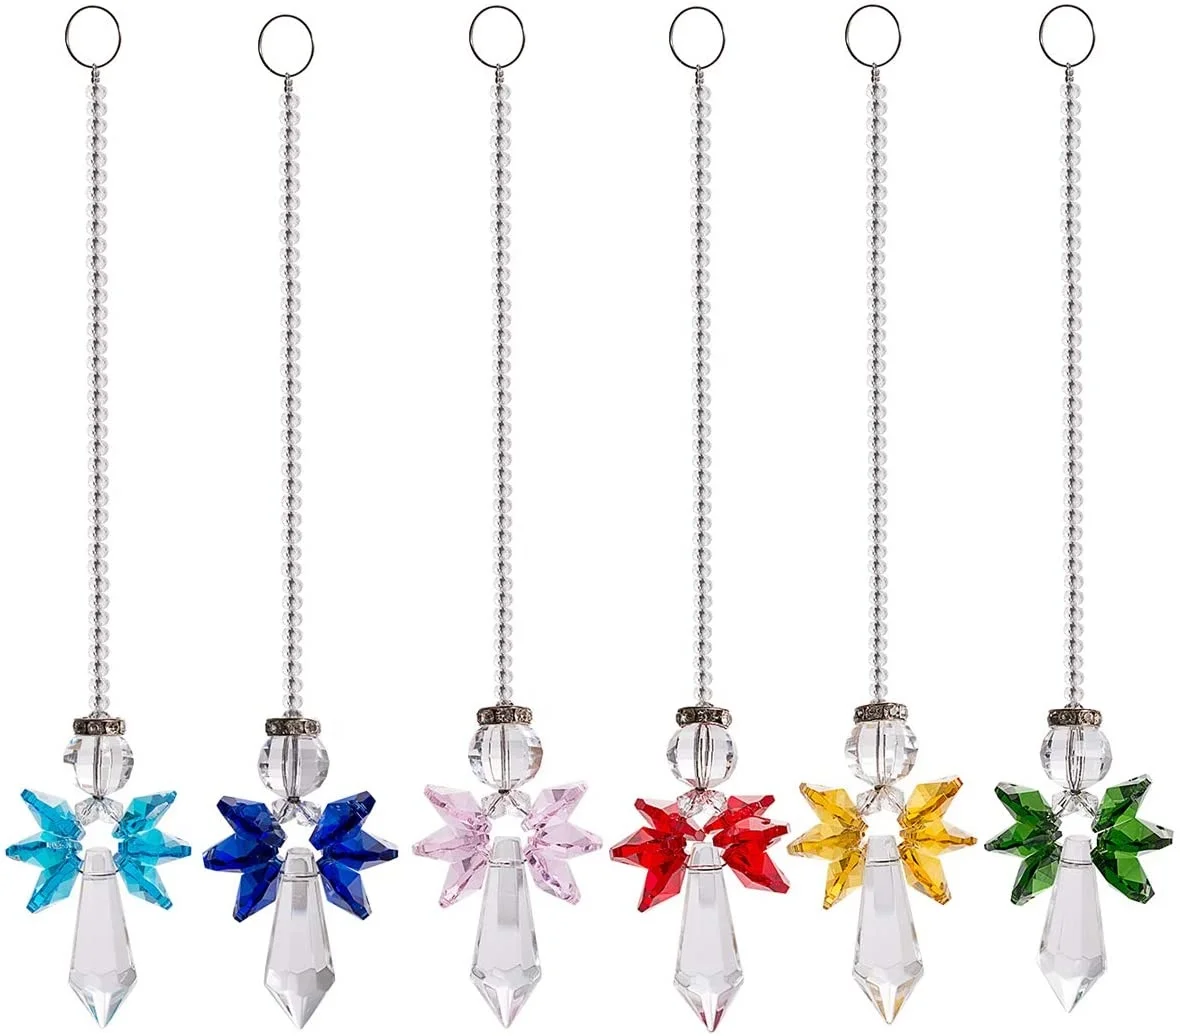 

Guardian Angel Crystal Hanging Ornament for Home Car Decoration Porch Decor Hangings Glass Ornament